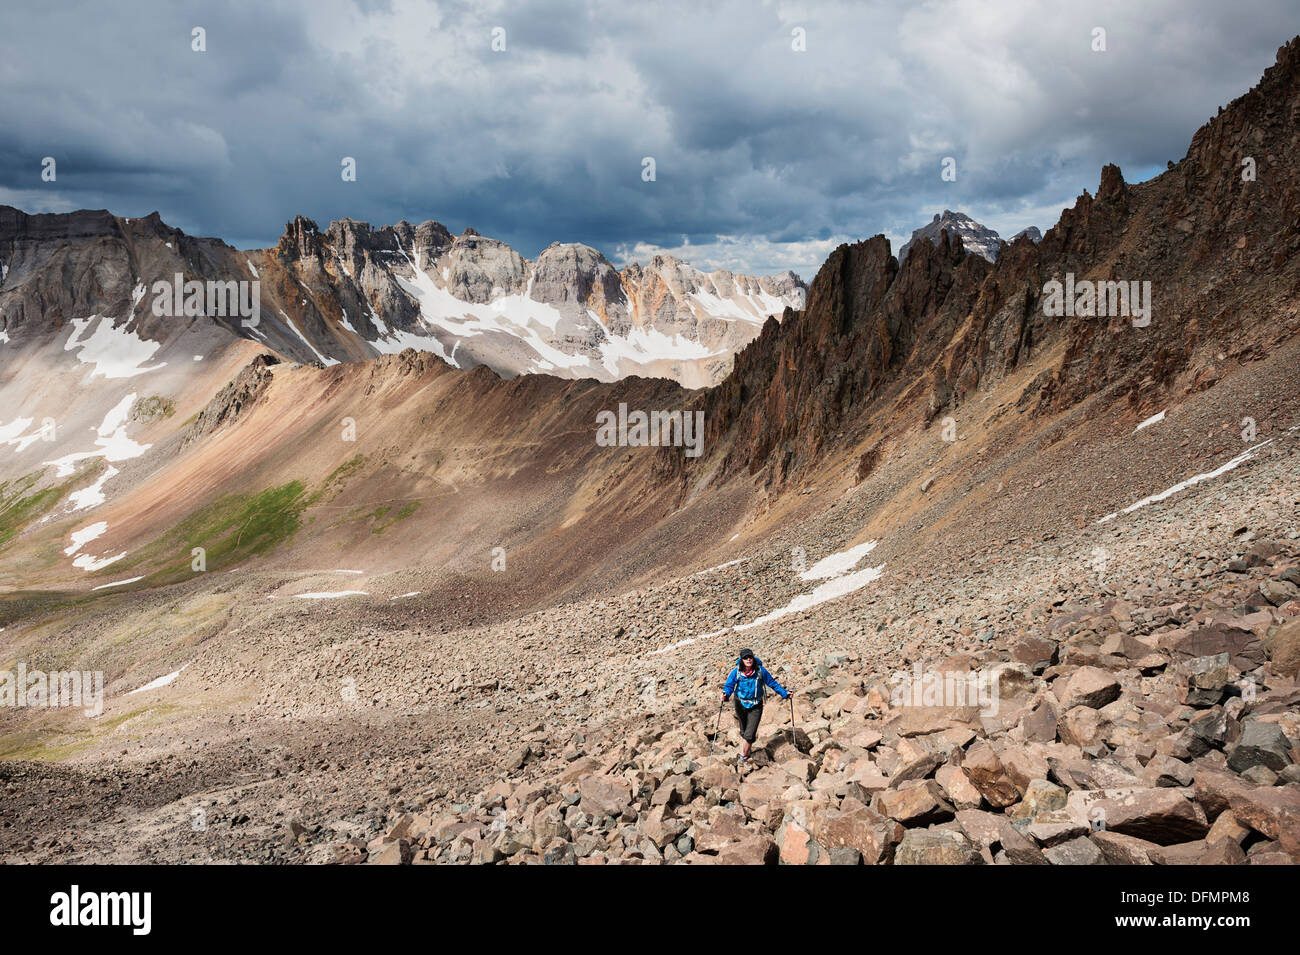 Female hiker ascending the rocky south slopes of Lavender Col route on Mt. Sneffels (14150 ft), San Juan mountains, Colorado, US Stock Photo